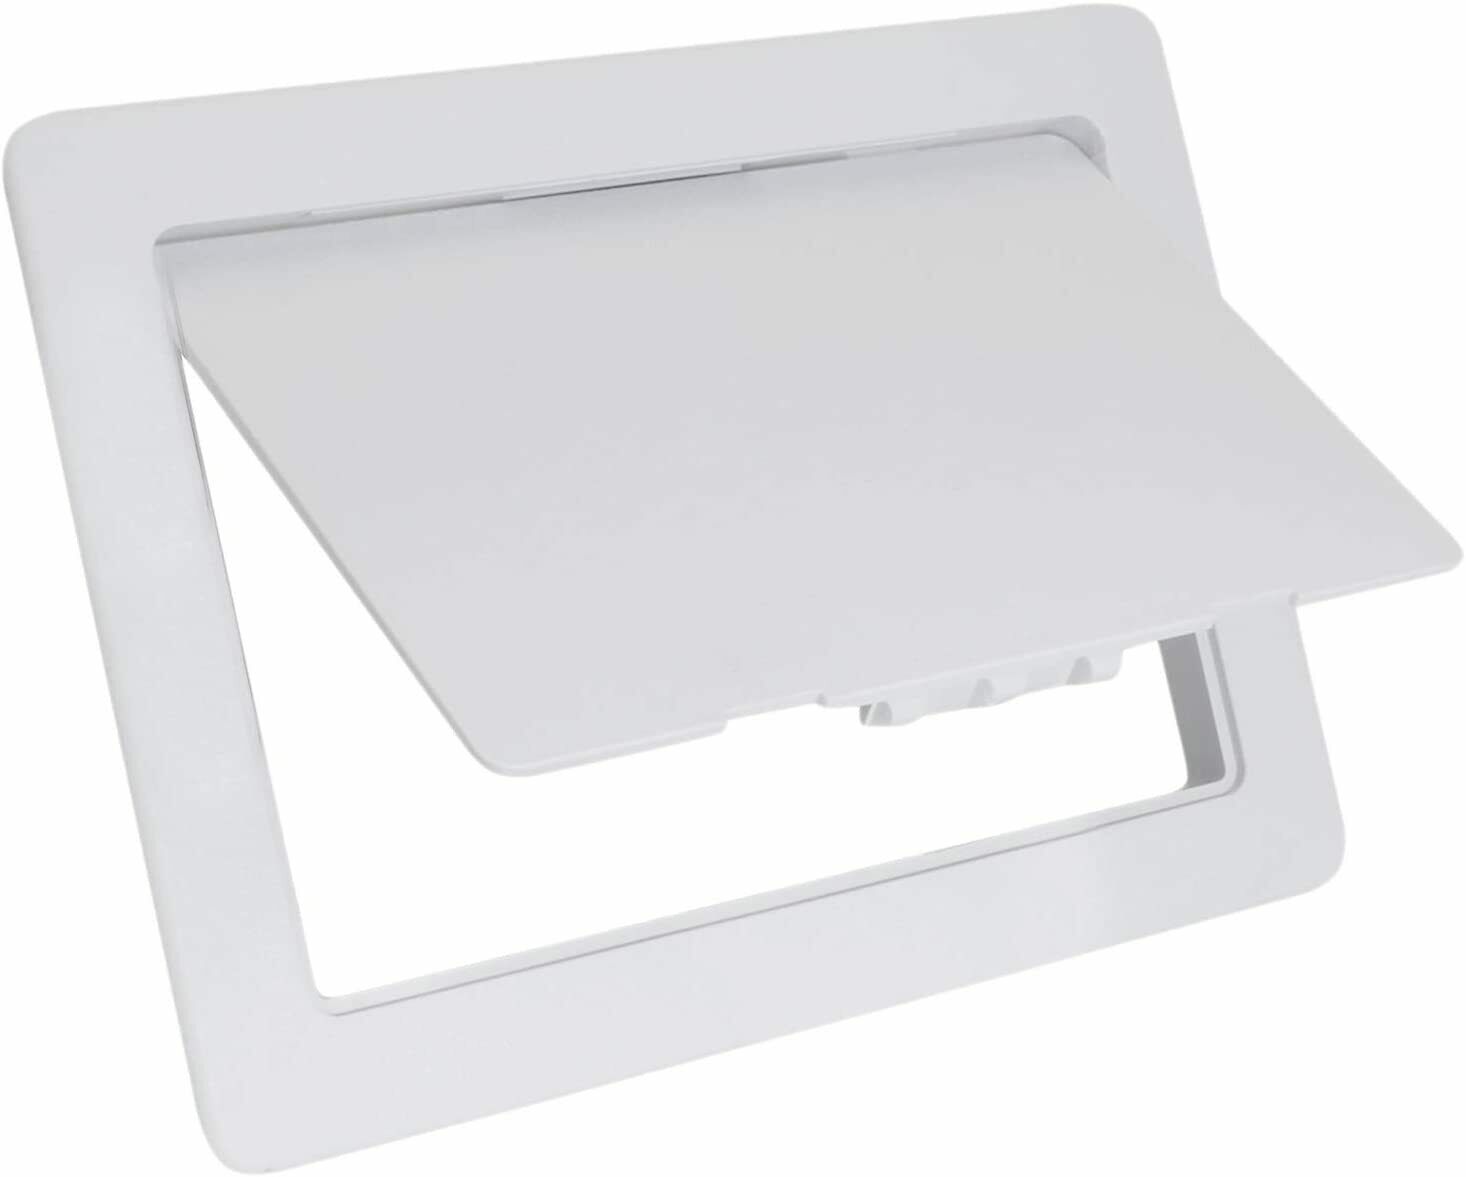 Access Plastic Panel For Drywall Ceiling 4 X 6 In Reinforced Wall Removable Door